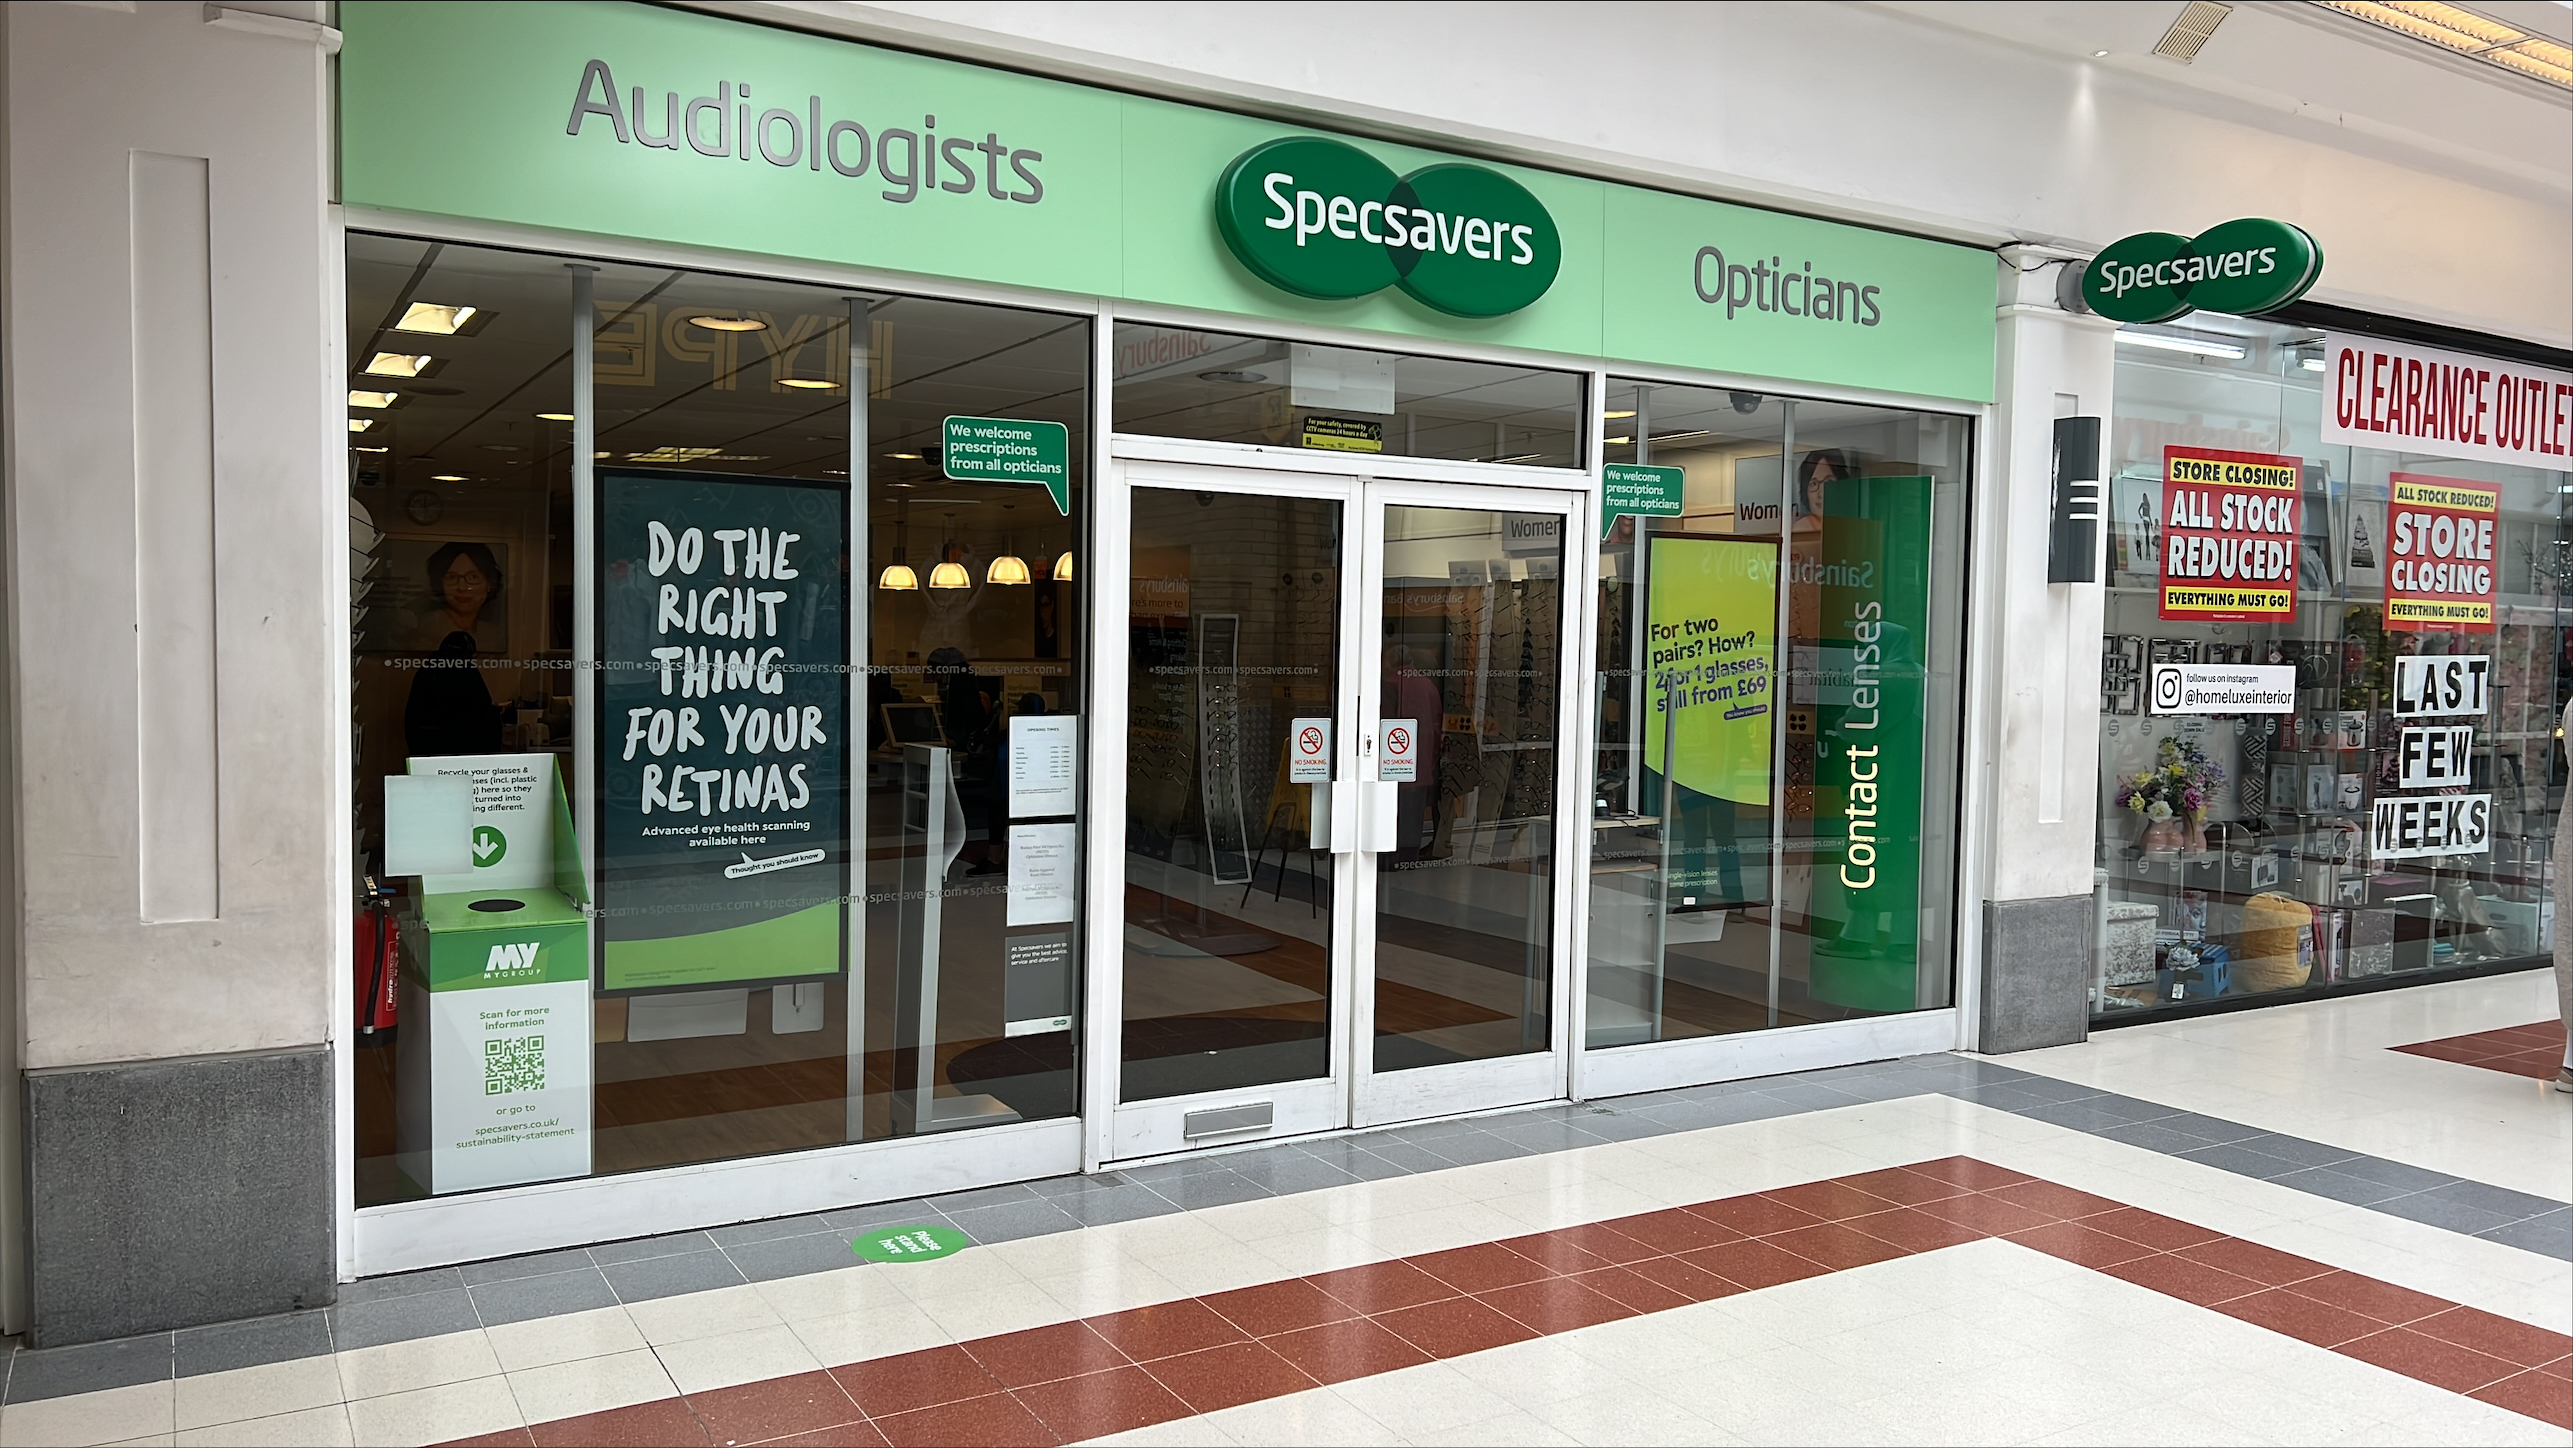 Images Specsavers Opticians London - Dalston Cross